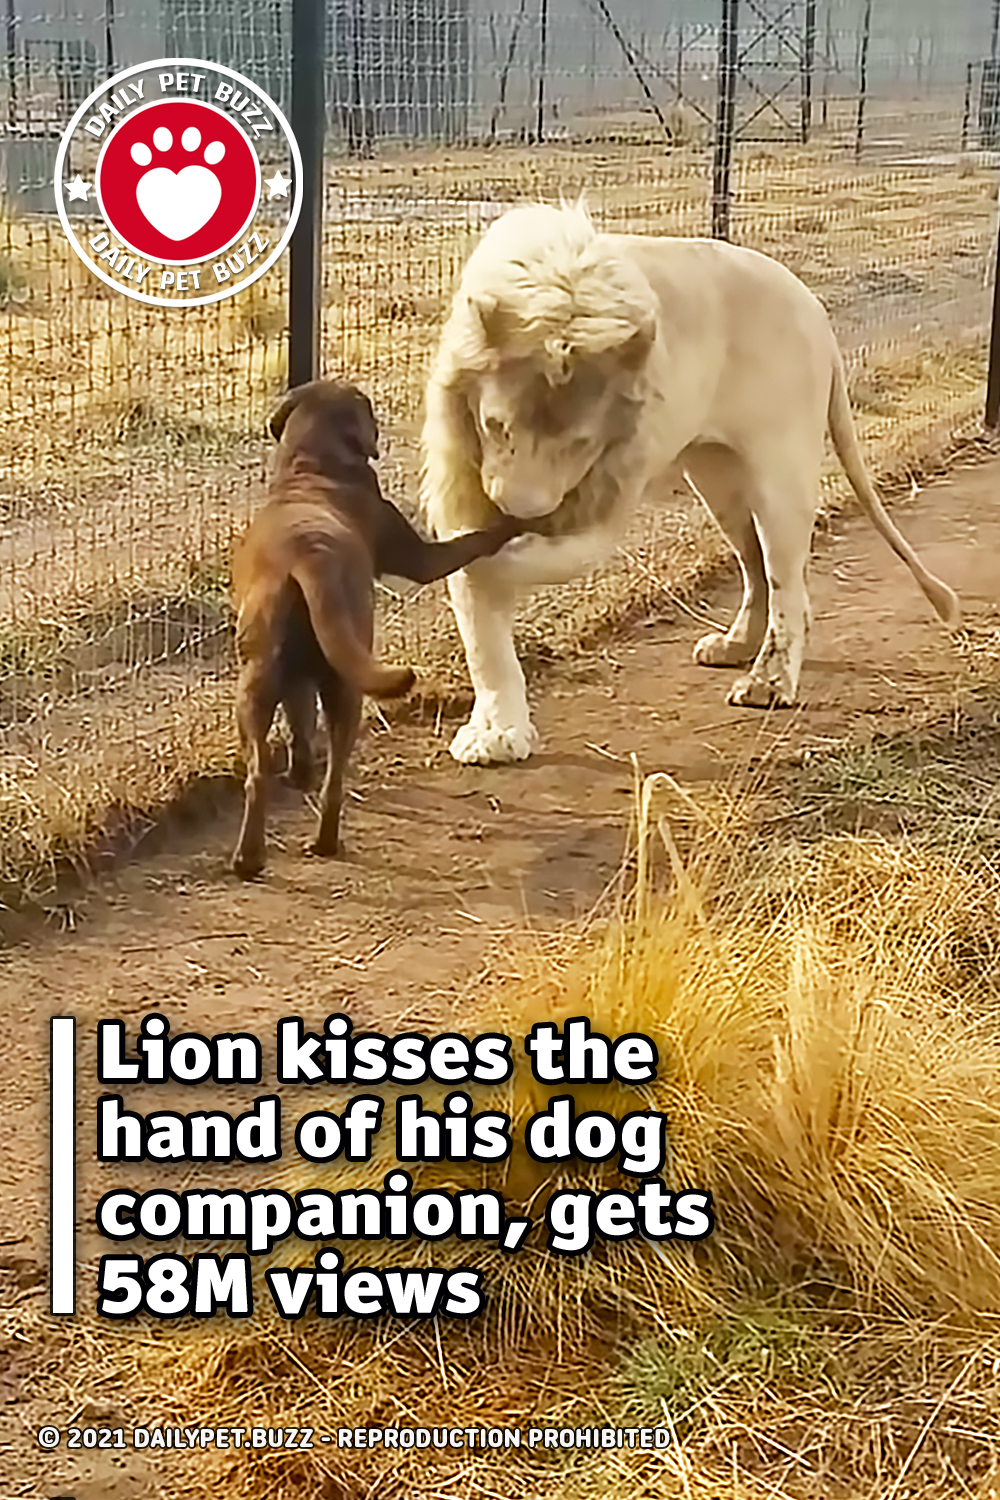 Lion kisses the hand of his dog companion, gets 58M views